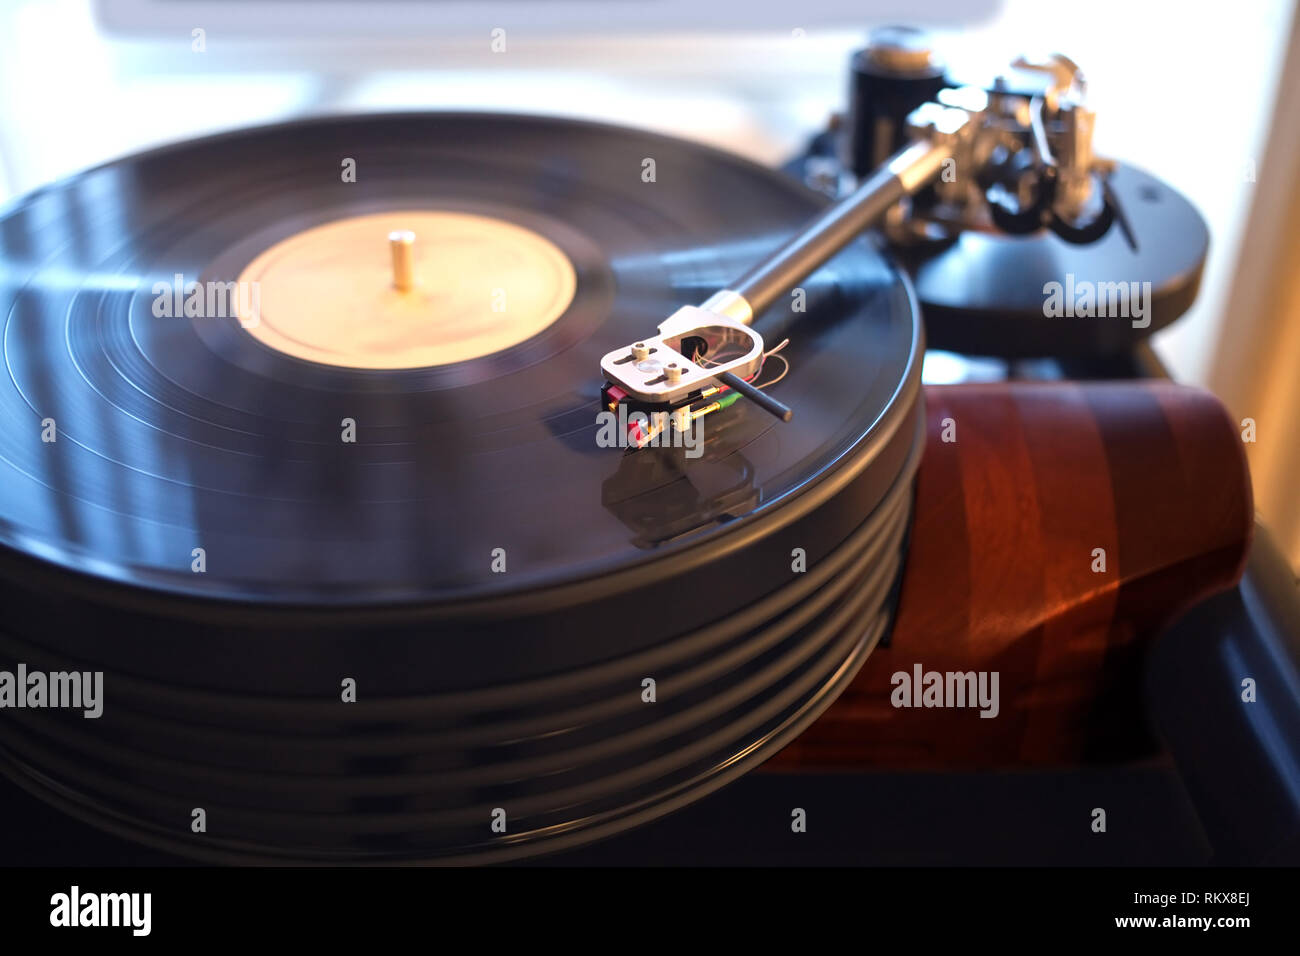 Vintage Turntable Rotating Lp Record In A Room With Subdued Light Horizontal View Closeup Stock Photo Alamy